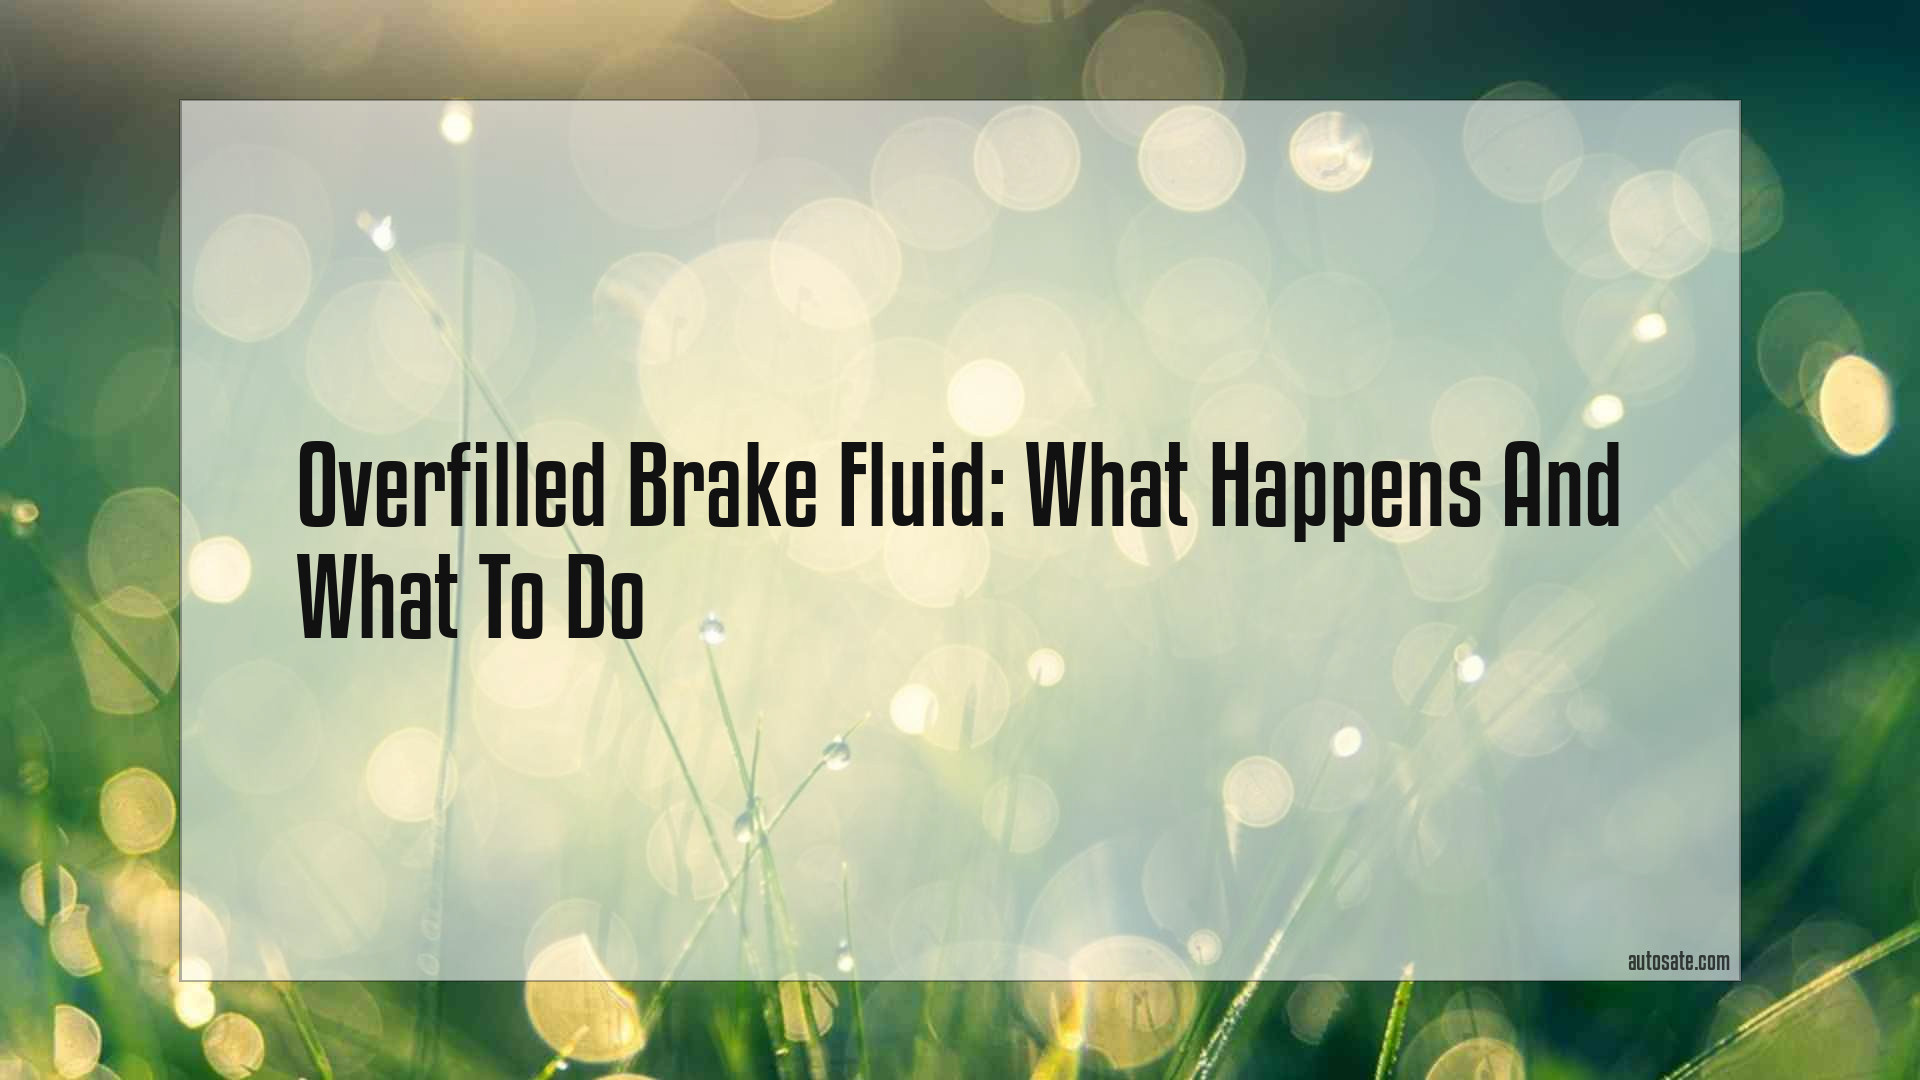 Overfilled Brake Fluid: What Happens And What To Do